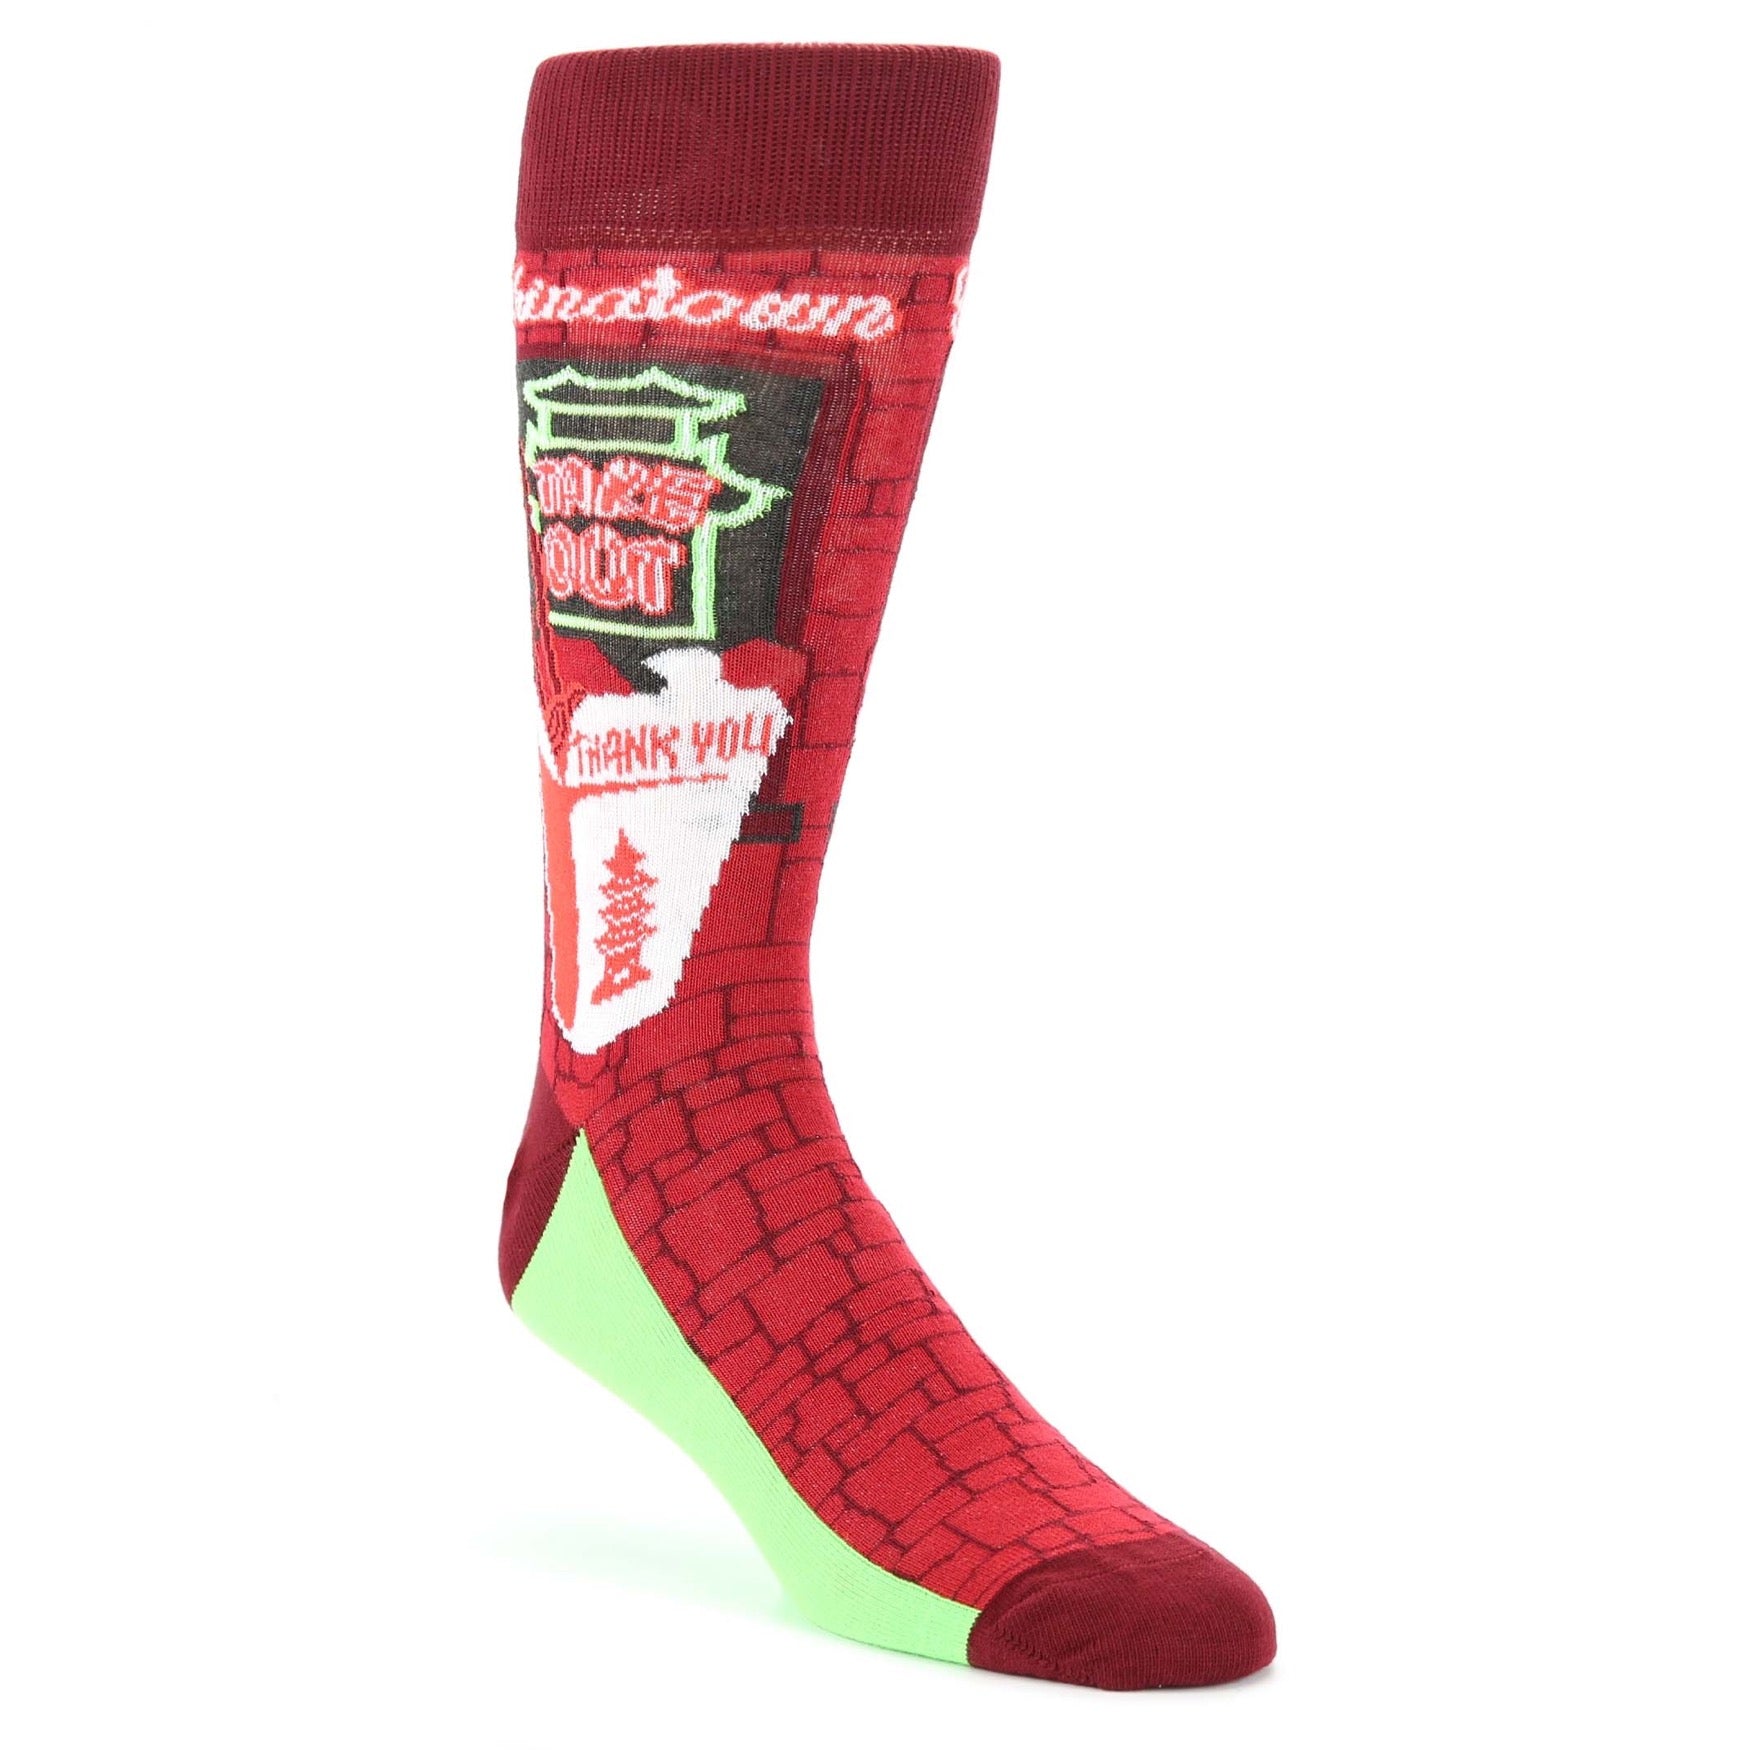 Red-Chinese-Take-Out-Mens-Dress-Socks-Statement-Sockwear